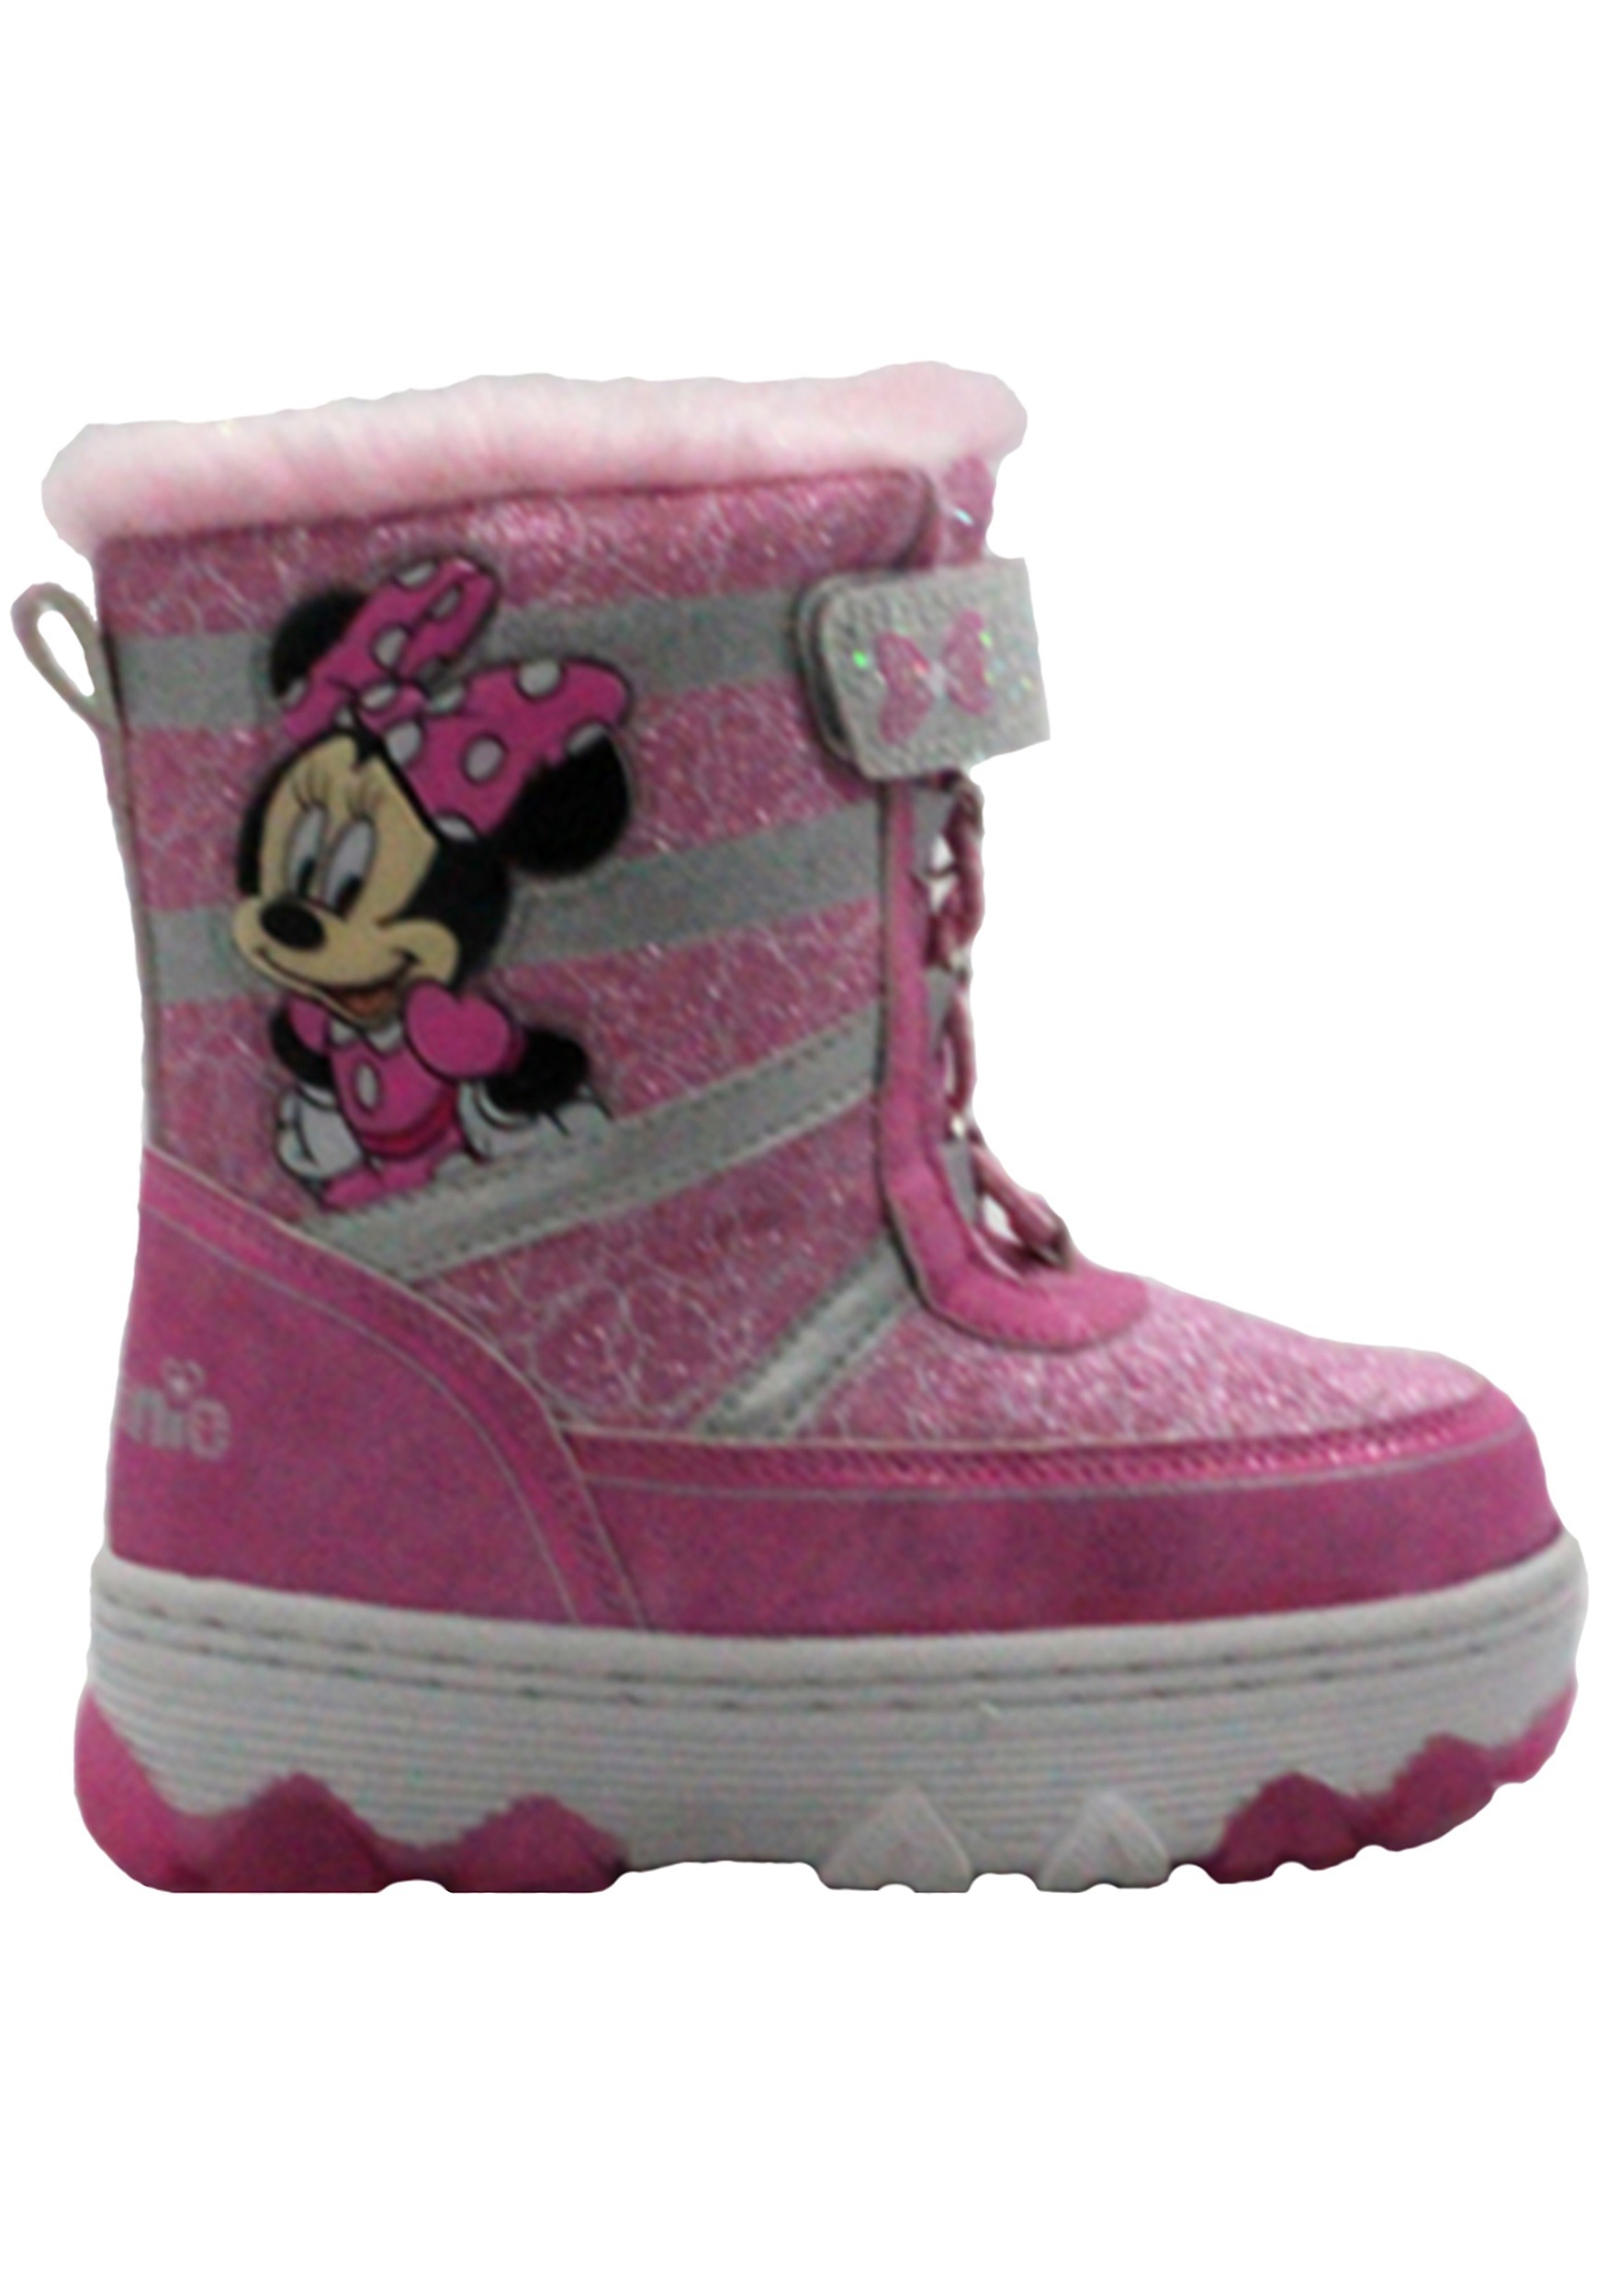 Minnie Mouse Child Pink Snow Boot